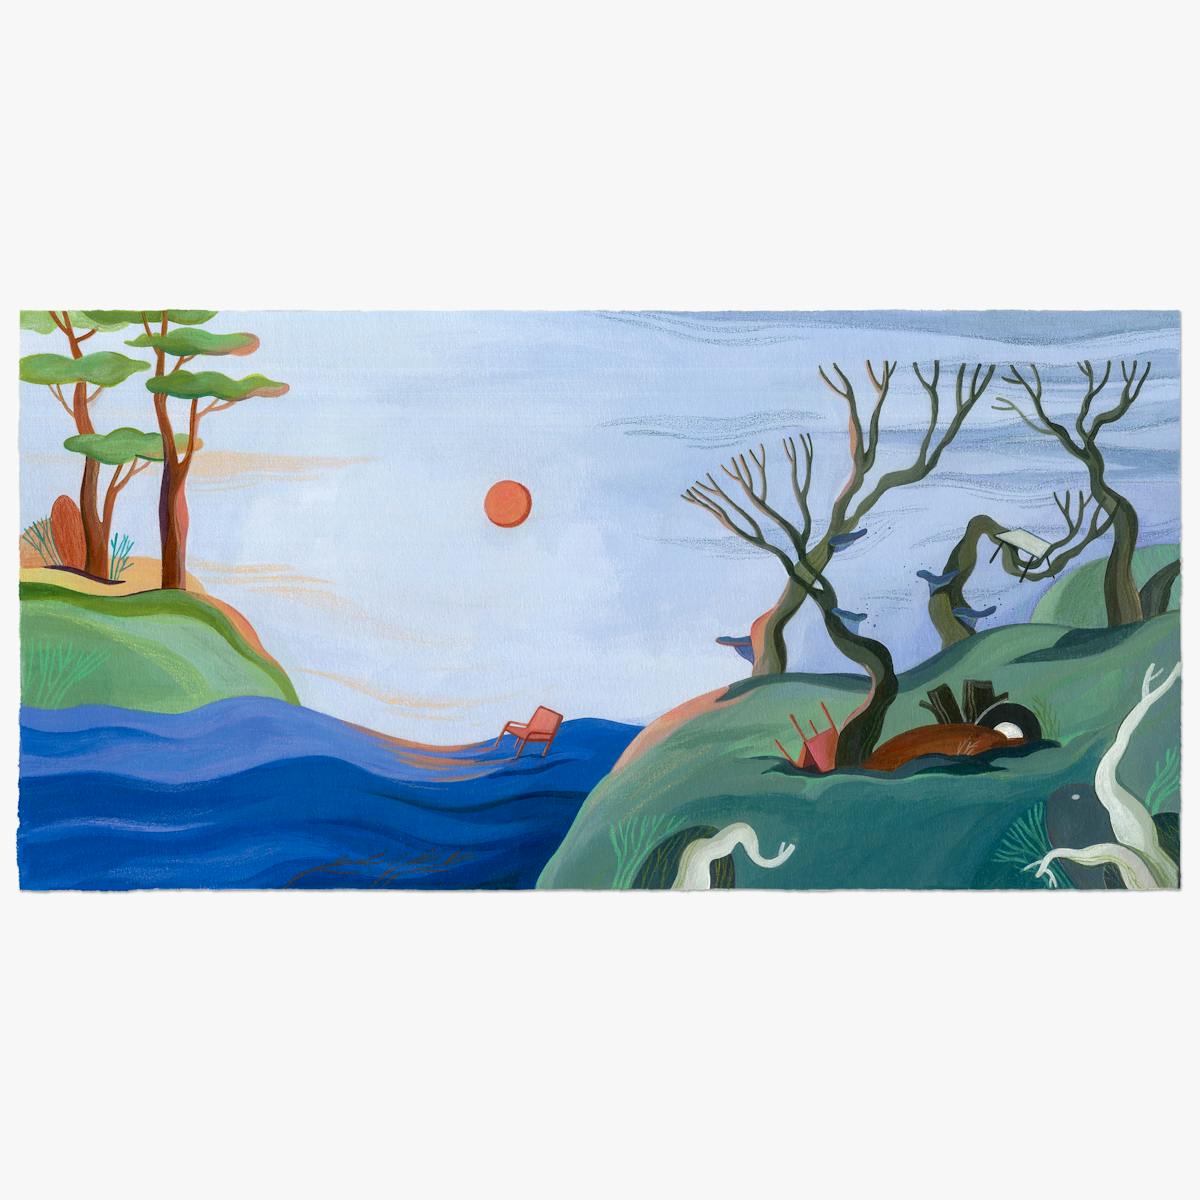 Painted artwork with vivid saturated colours. The scene shows a landscape with a blue river running through the middle of green, tree and grass covered banks. On the distant bank to the left, the trees look healthy and covered in leaves. On the near bank to the right, the trees are leafless and have twisted trunks and branches. This bank is littered with rubbish, mainly abandoned furniture, some of which is lodged in the tree branches. Floating in the middle of the river is a lone red chair, bobbing about beneath a blood red sun in the blue sky.